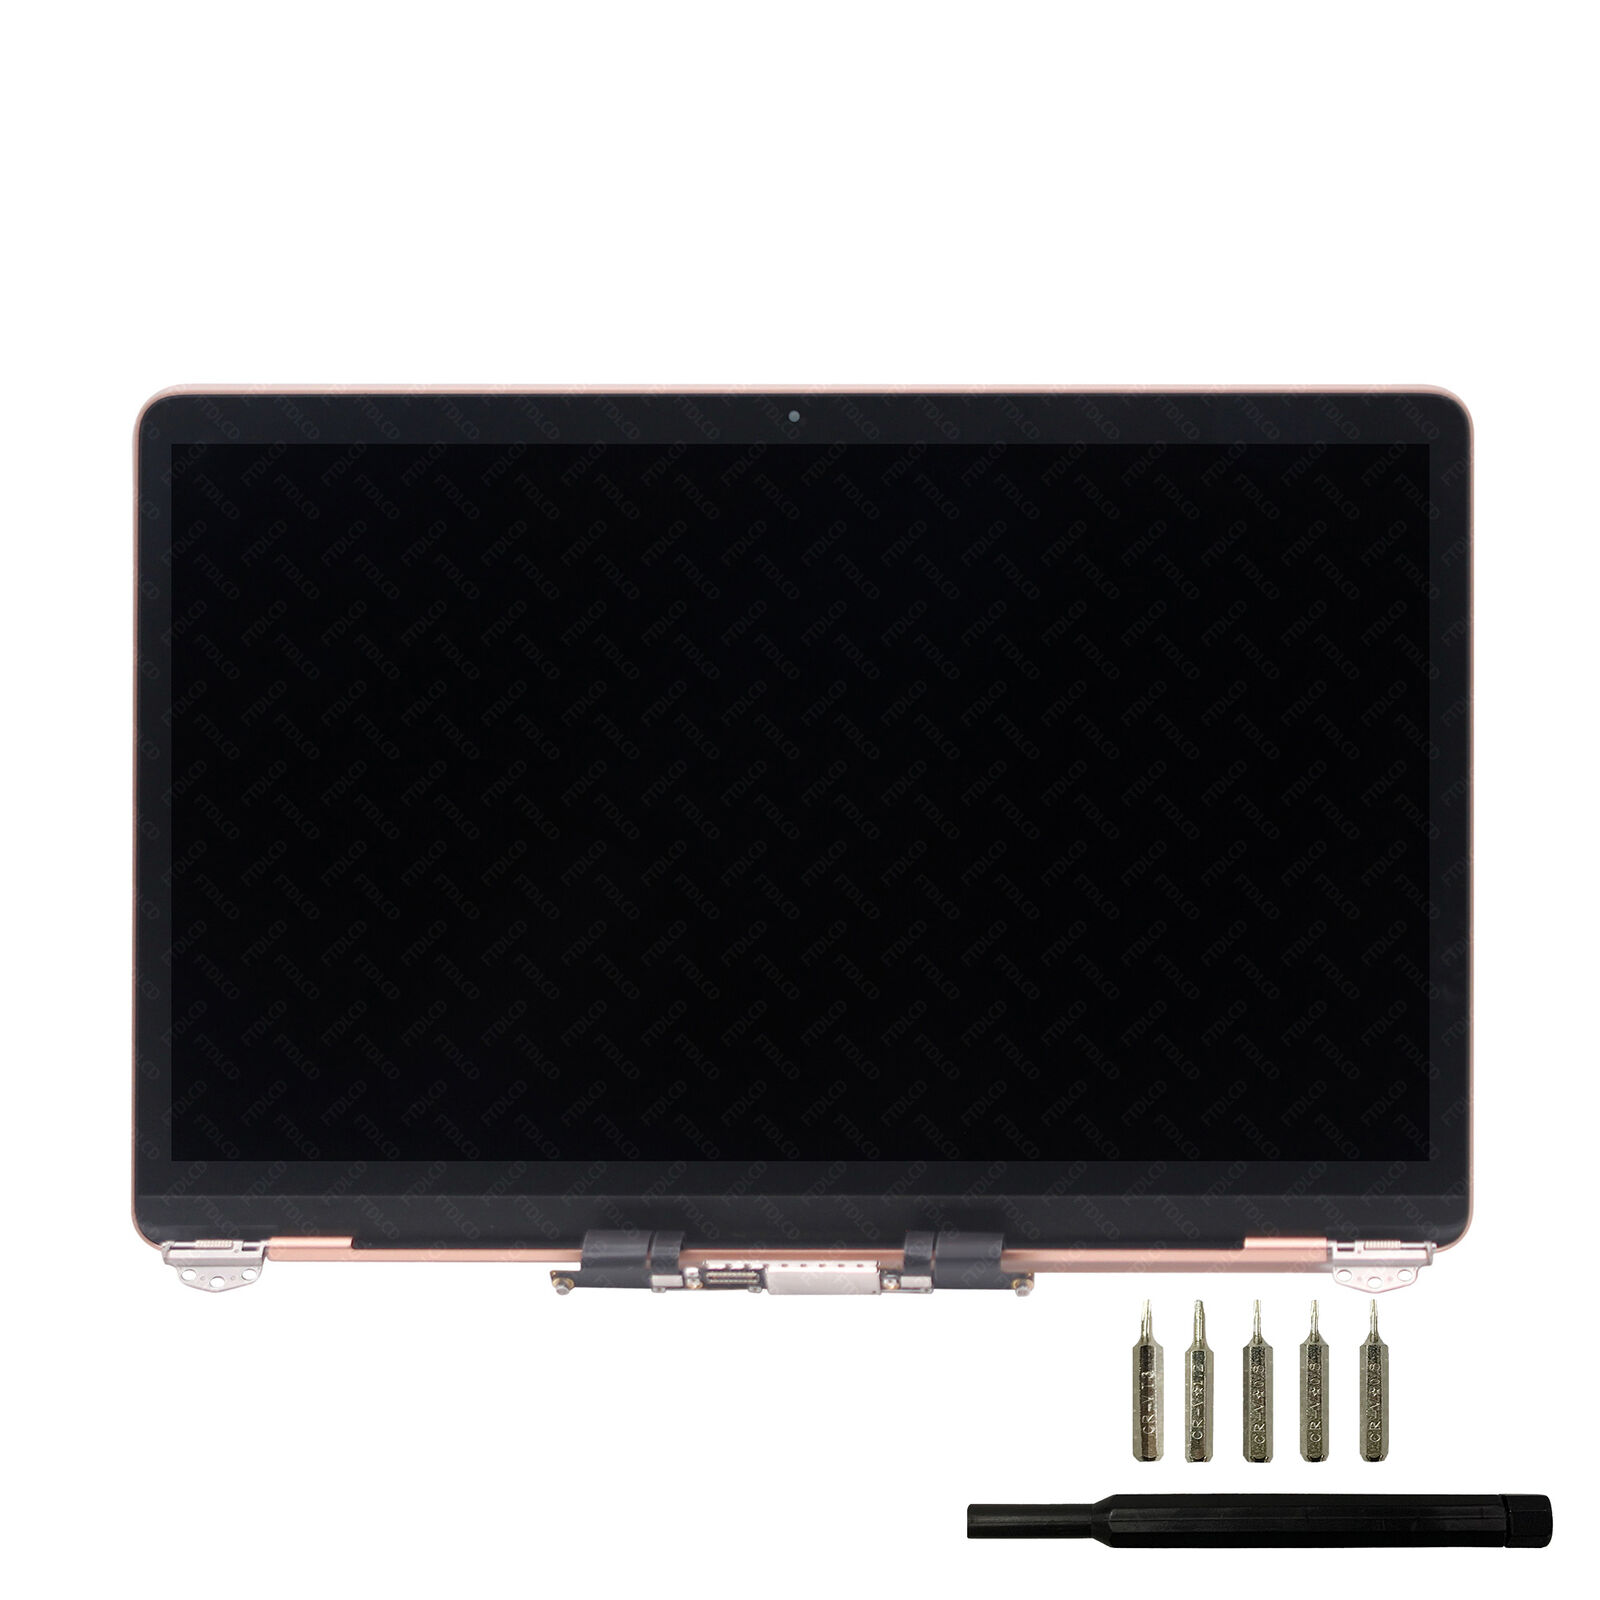 New For MacBook Air 13'' A1932 EMC 3184 2018 Display Laptop Screen Assembly